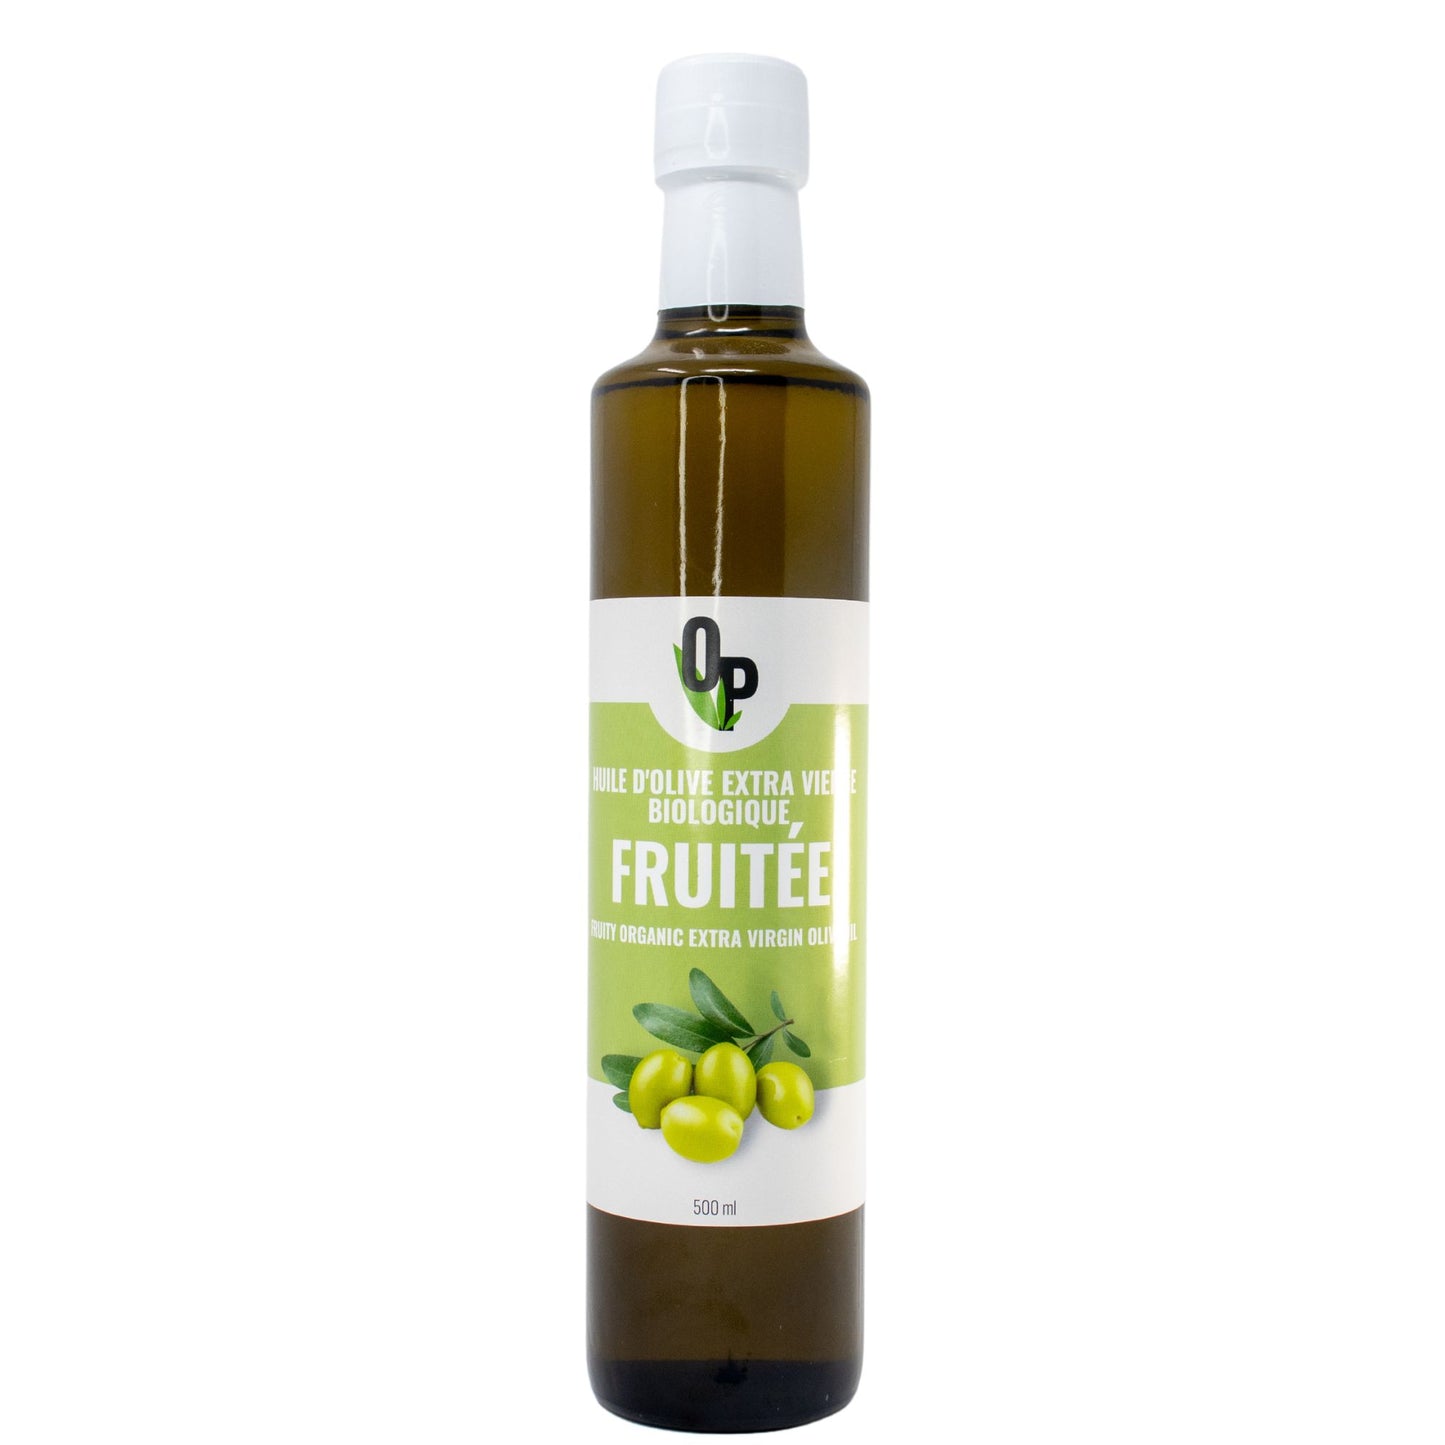 FRUITÉE 500ml - Huile d'olive extra vierge